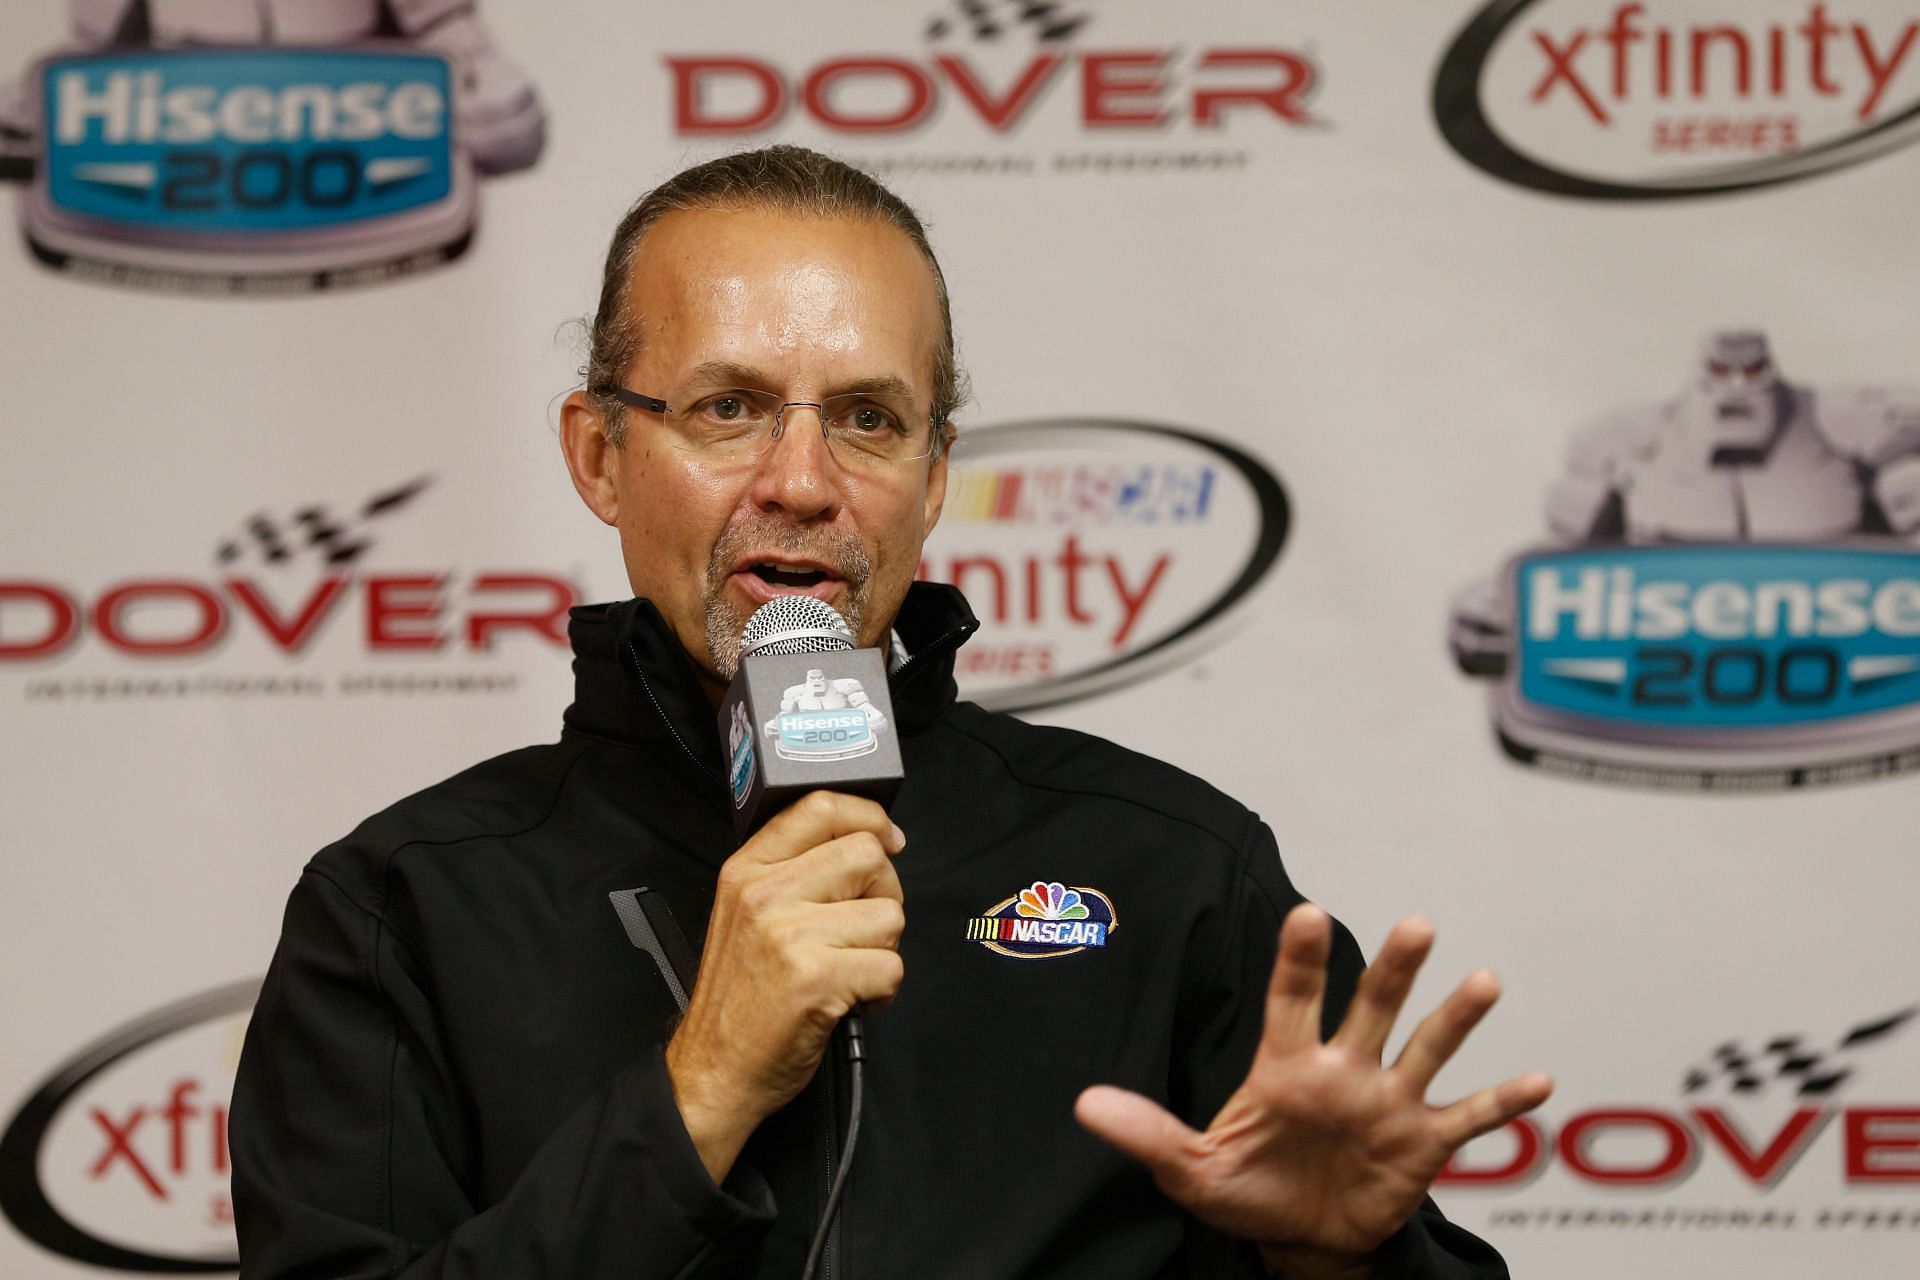 Kyle Petty speaks with the media at a press conference before the NASCAR XFINITY Series Hisense 200 at Dover International Speedway (Photo by Brian Lawdermilk/Getty Images)